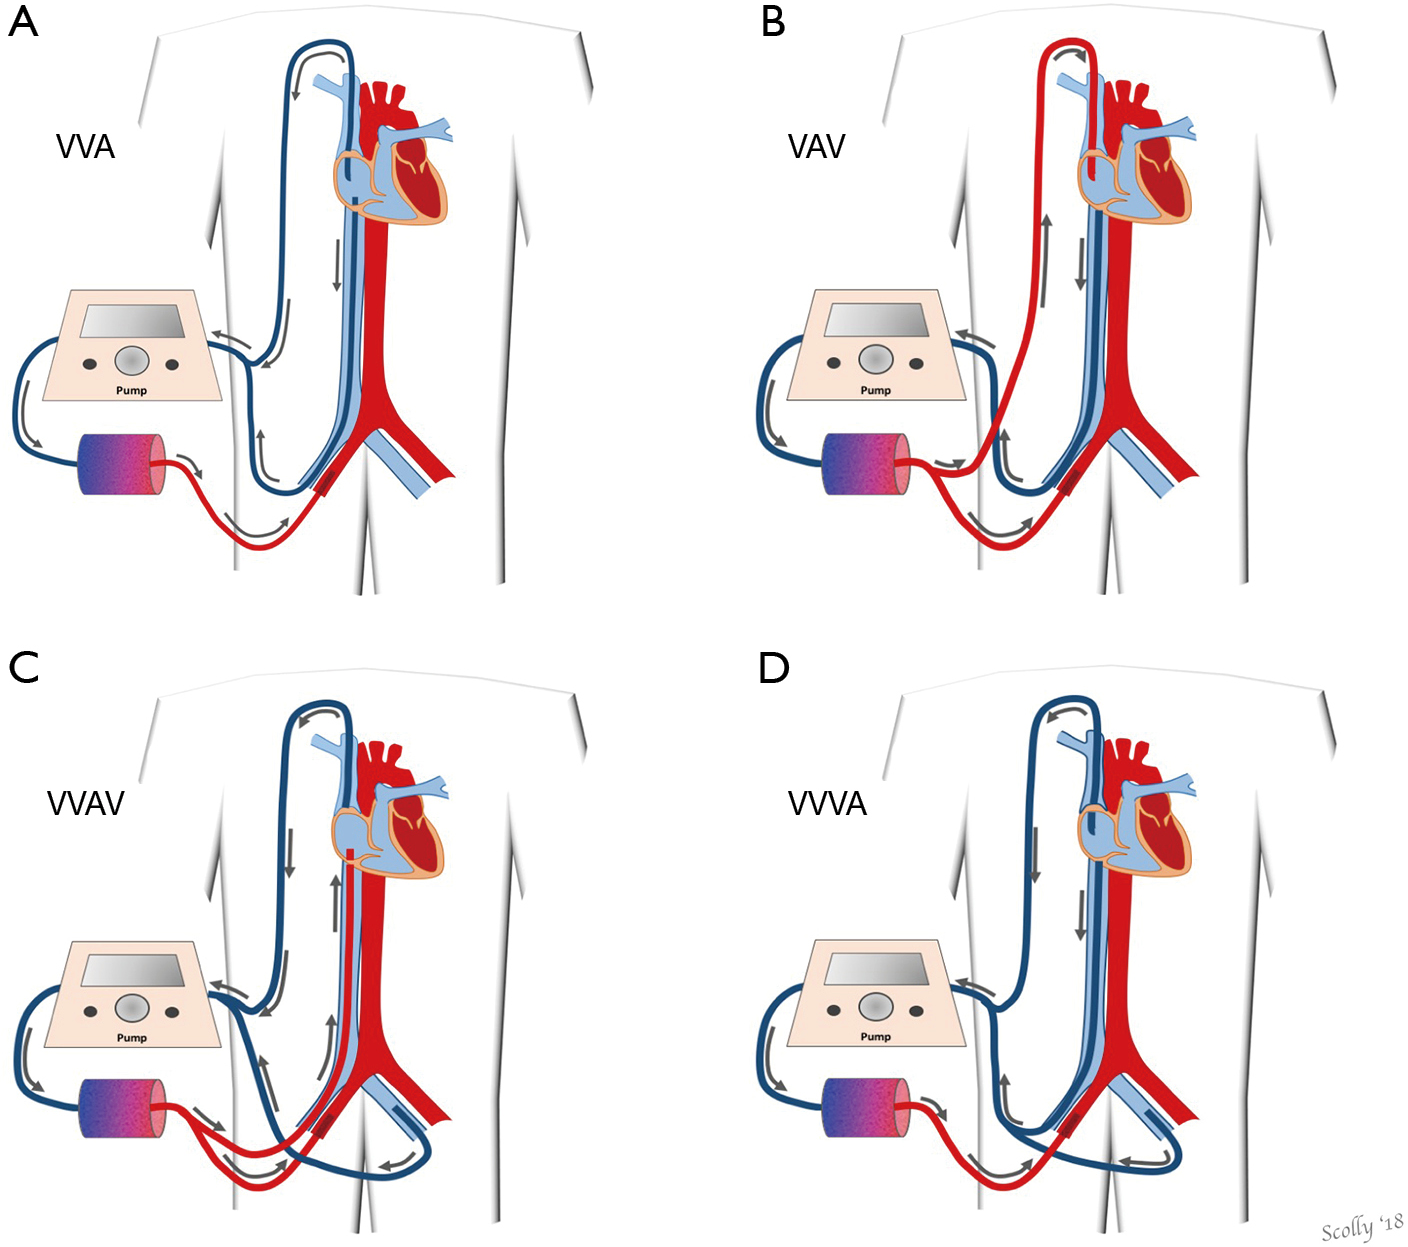 Hybrid extracorporeal membrane oxygenation - Brasseur - Journal of Thoracic Disease